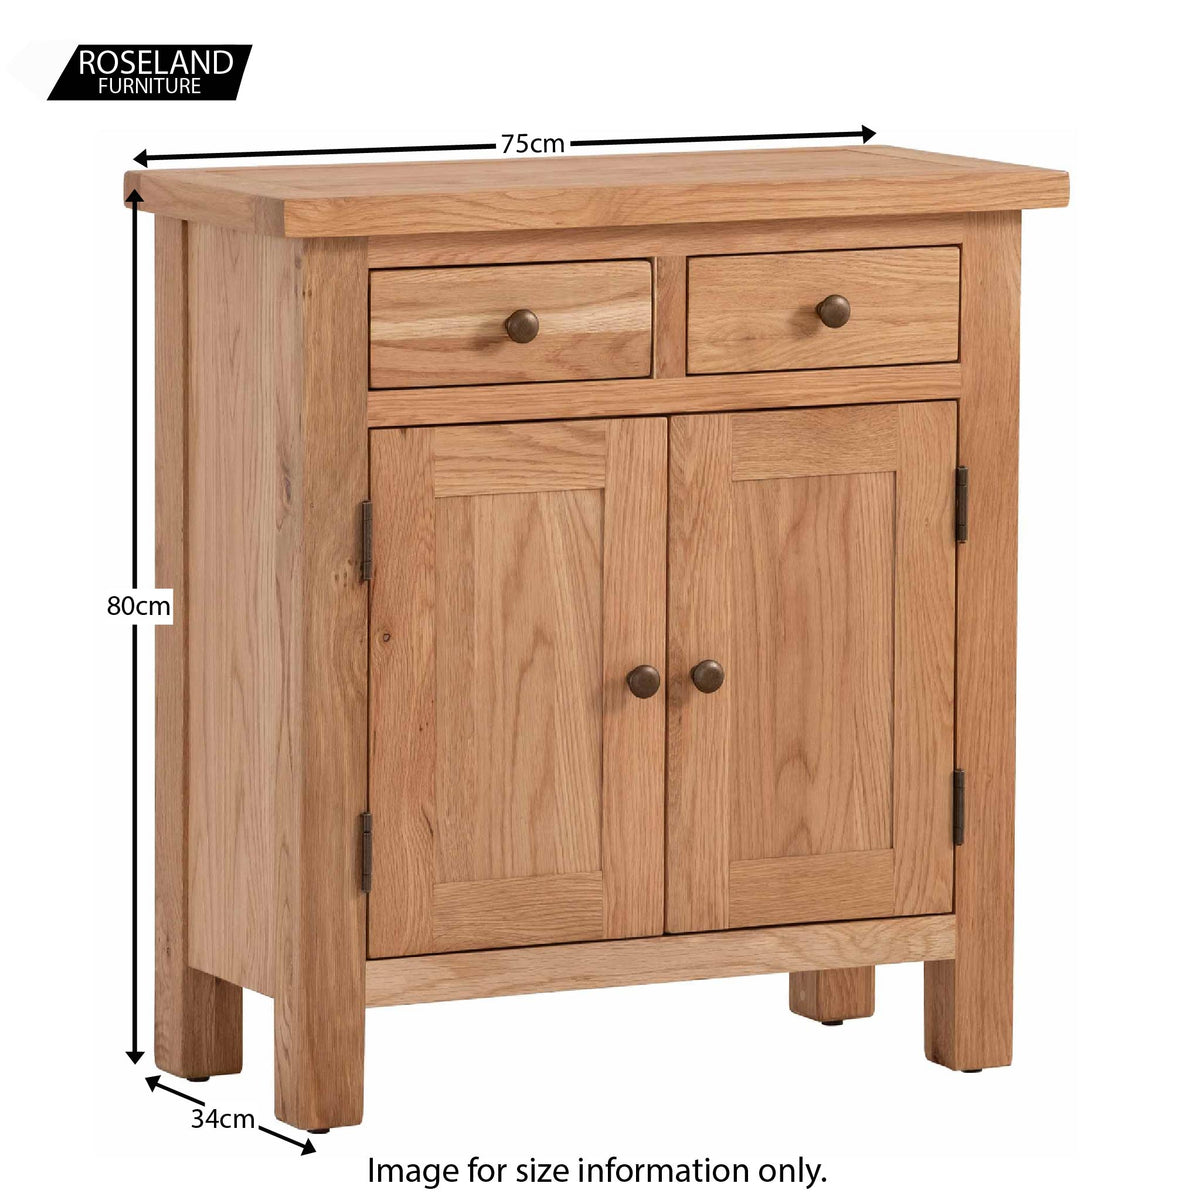 Dimensions - Charlestown Oak Extra Small Sideboard